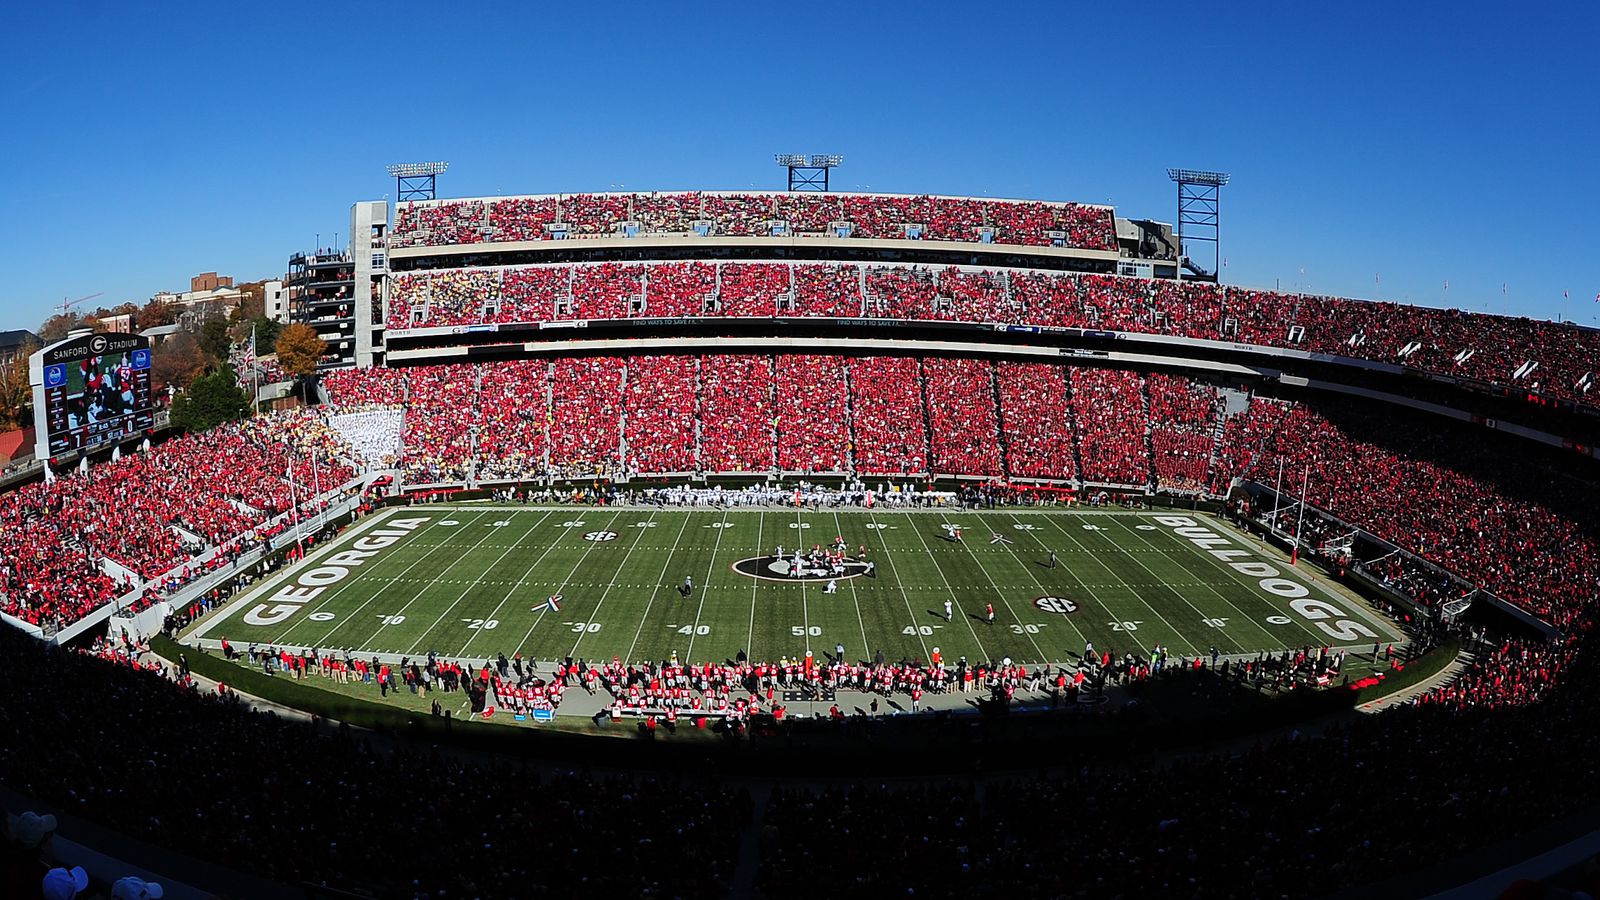 Just One Spring Game Topped Sanford Stadium's Capacity in 2015 - Dawg